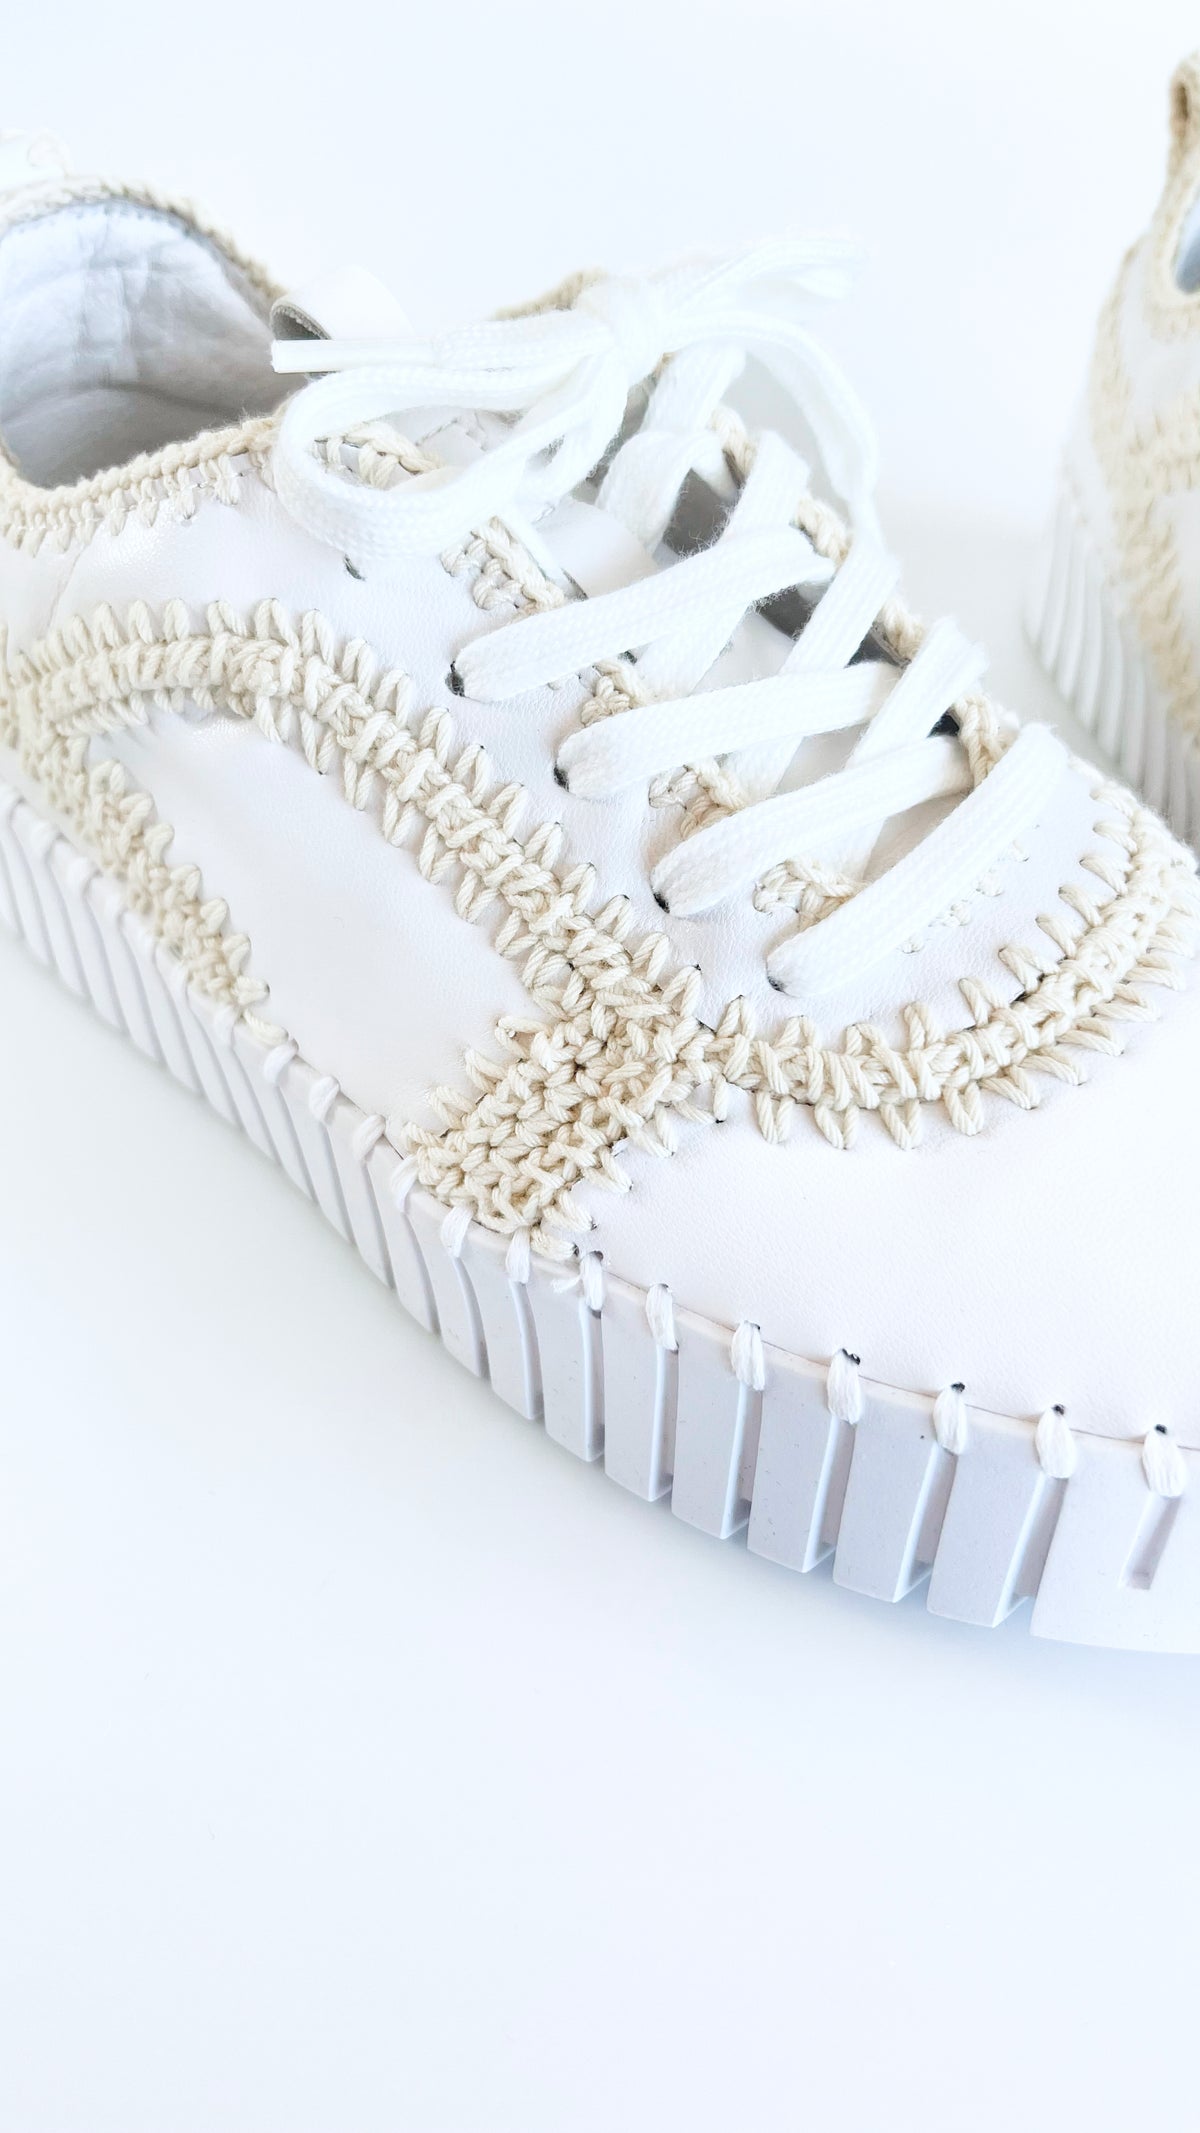 Braided Crochet Sneaker-250 Shoes-Eliya - Bernie-Coastal Bloom Boutique, find the trendiest versions of the popular styles and looks Located in Indialantic, FL